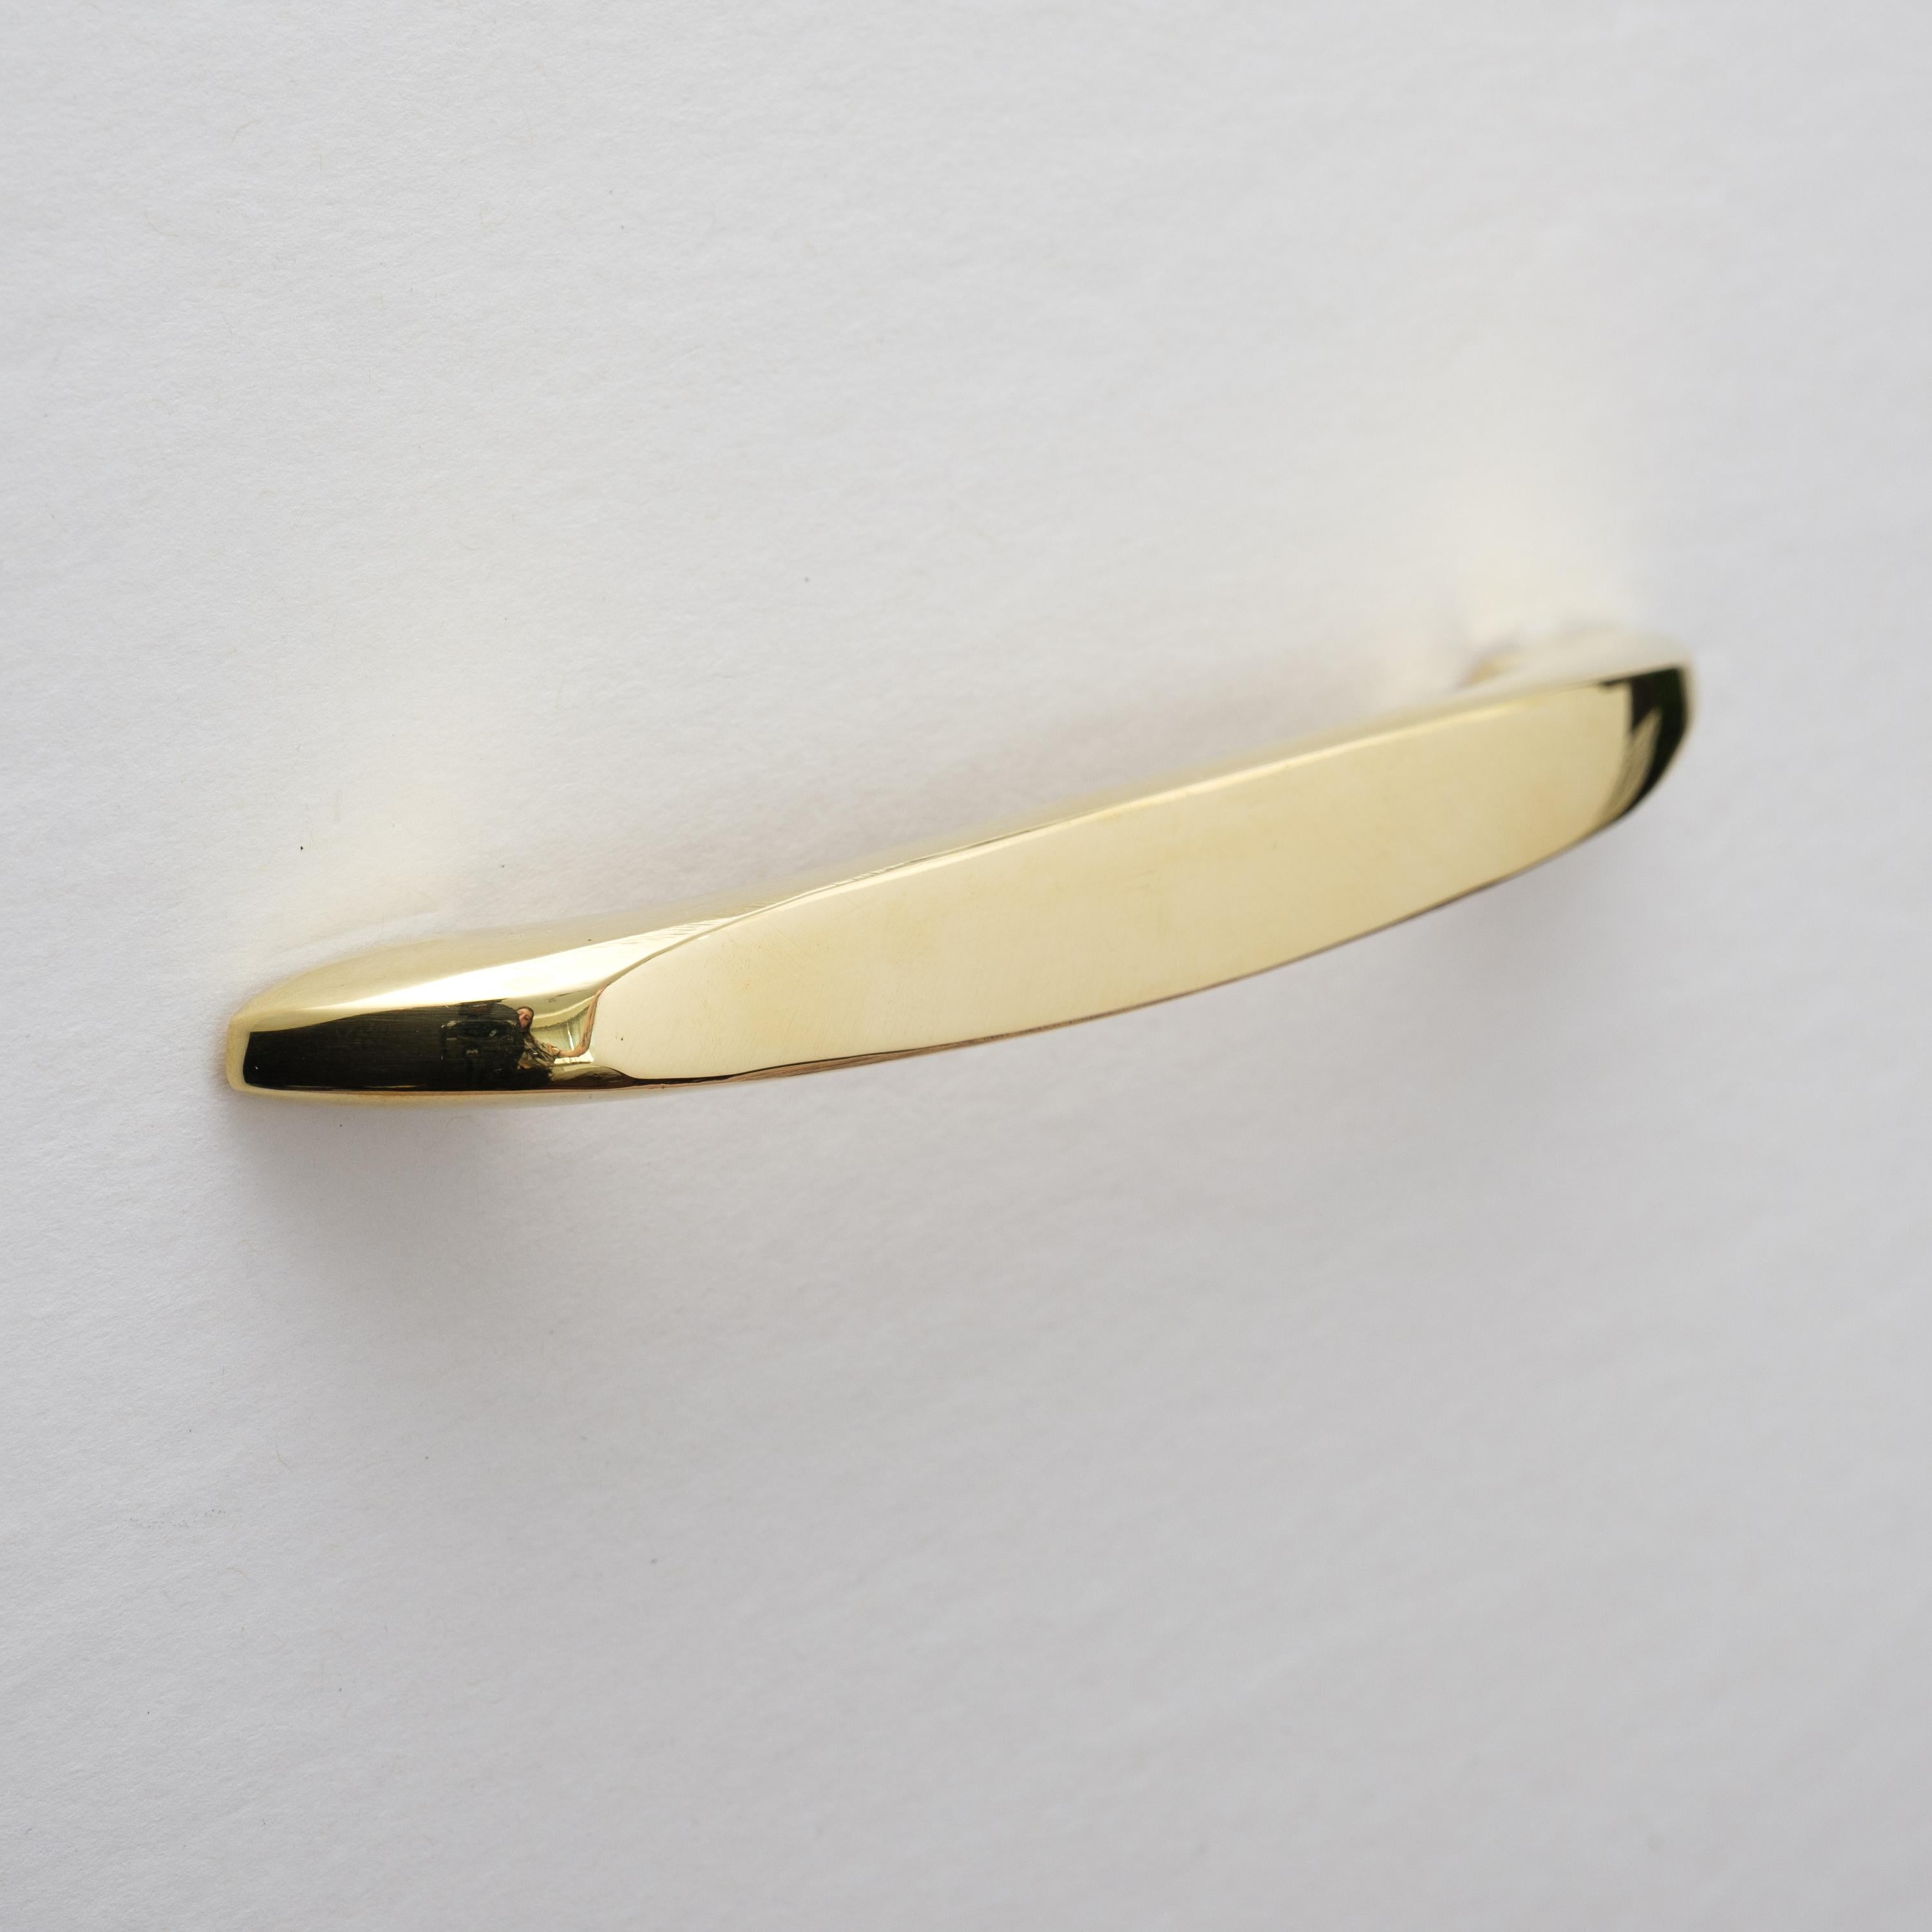 Carl Auböck model #9063-1 polished brass drawer pull.

Designed in the 1950s, this versatile and Minimalist Viennese drawer pull is executed in polished brass by Werkstätte Carl Auböck, Austria. Its minimalist design combines clean form with